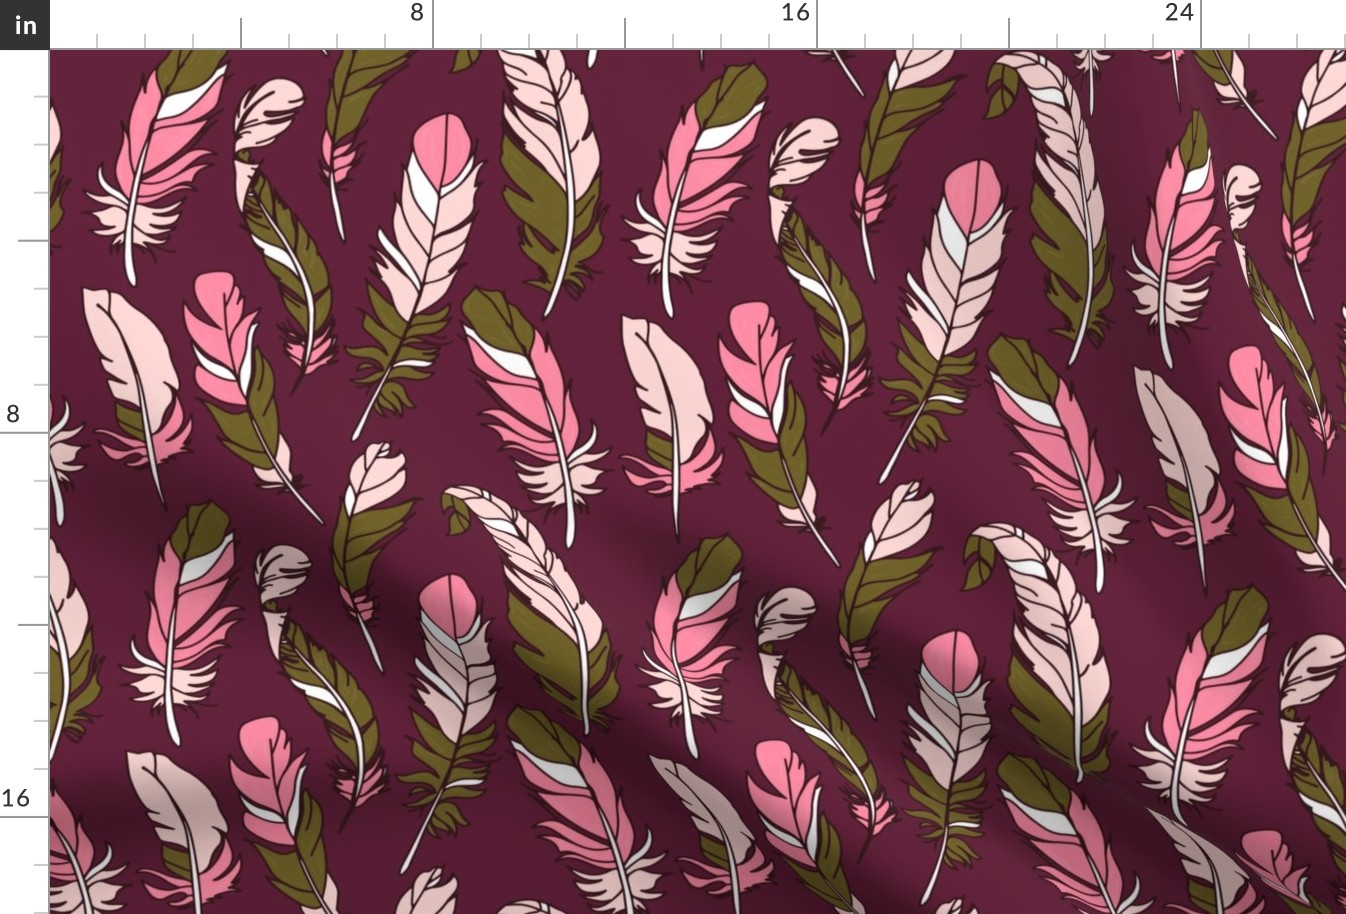 Feathers - Pink & Green on Plum